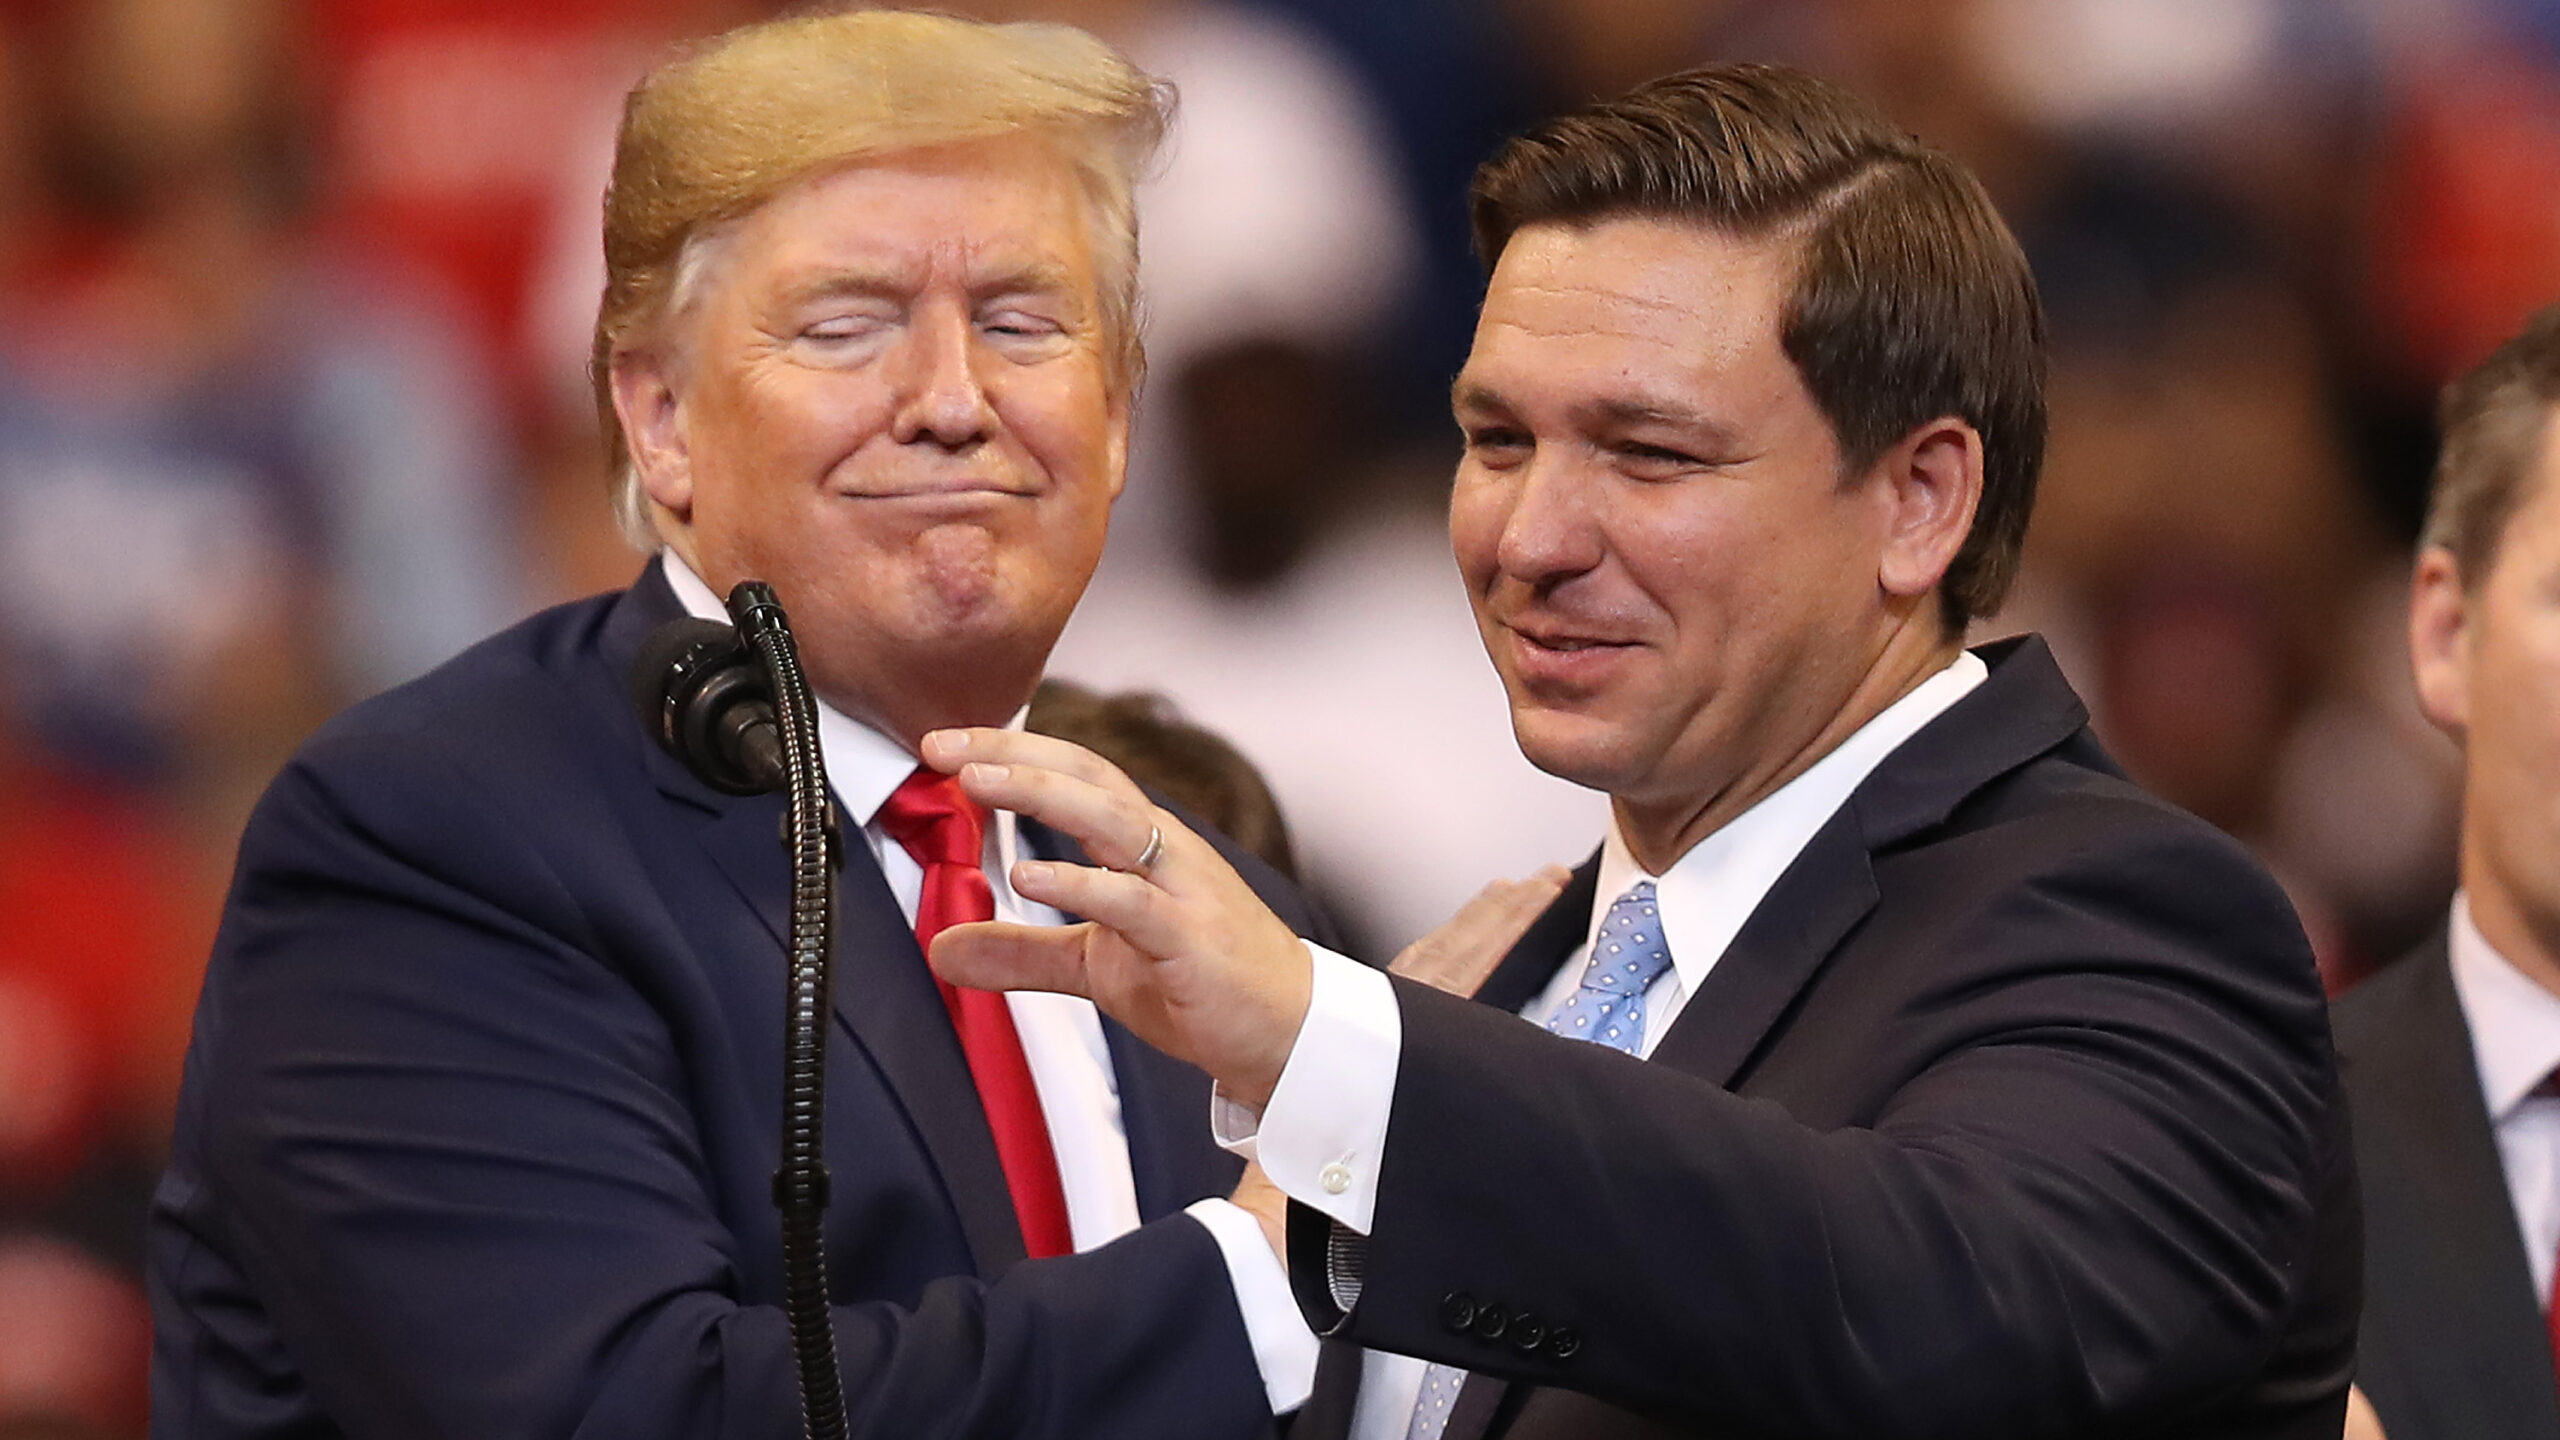 DeSantis raises funds for Trump as former president praises governor: “Ron, thrilled to have you back!